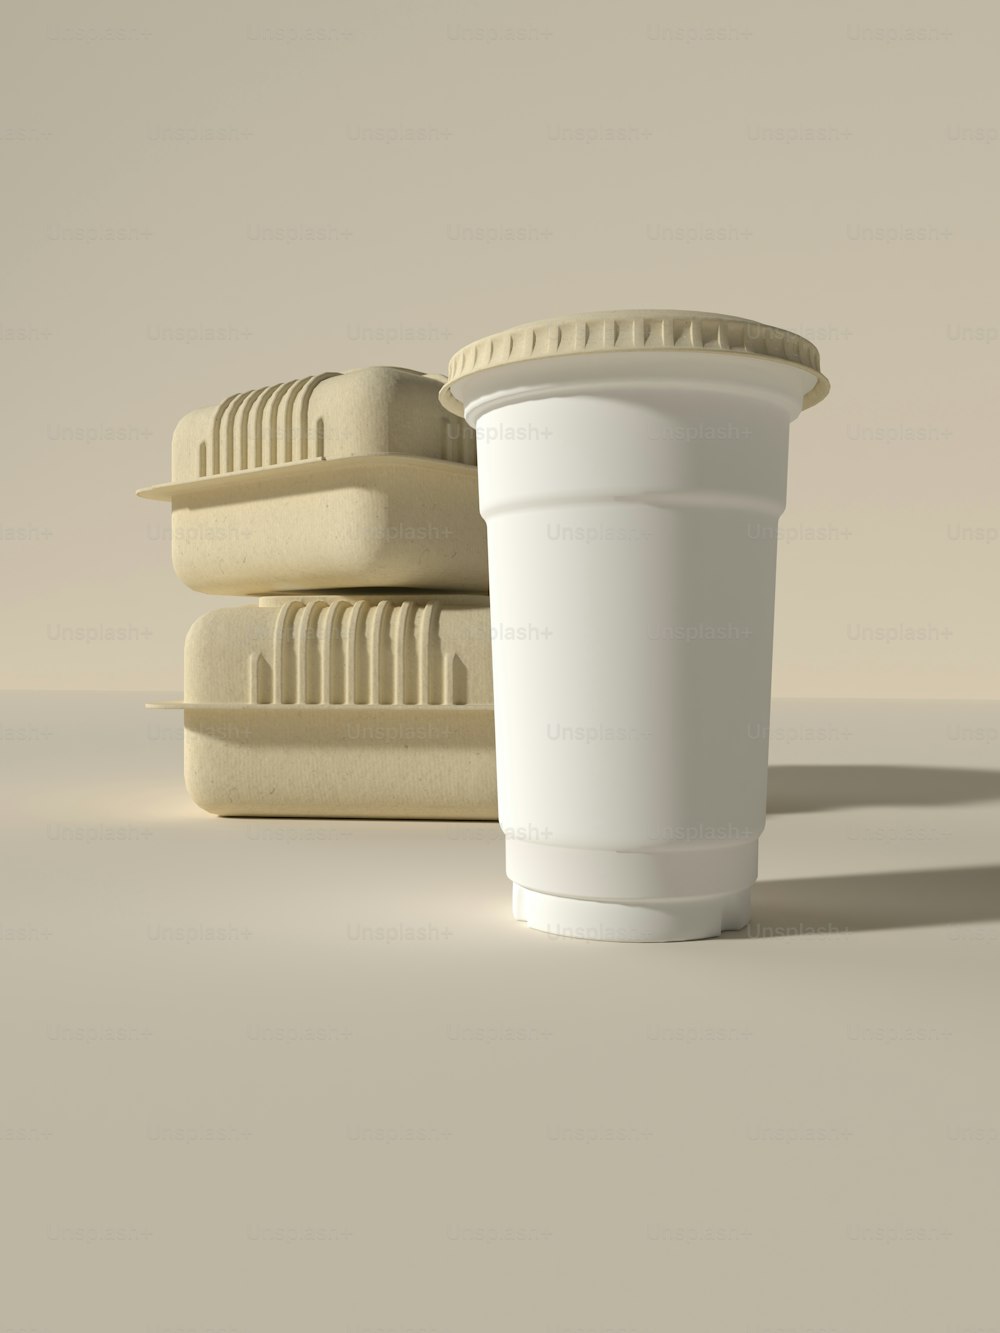 a cup of coffee sitting next to a stack of mattresses